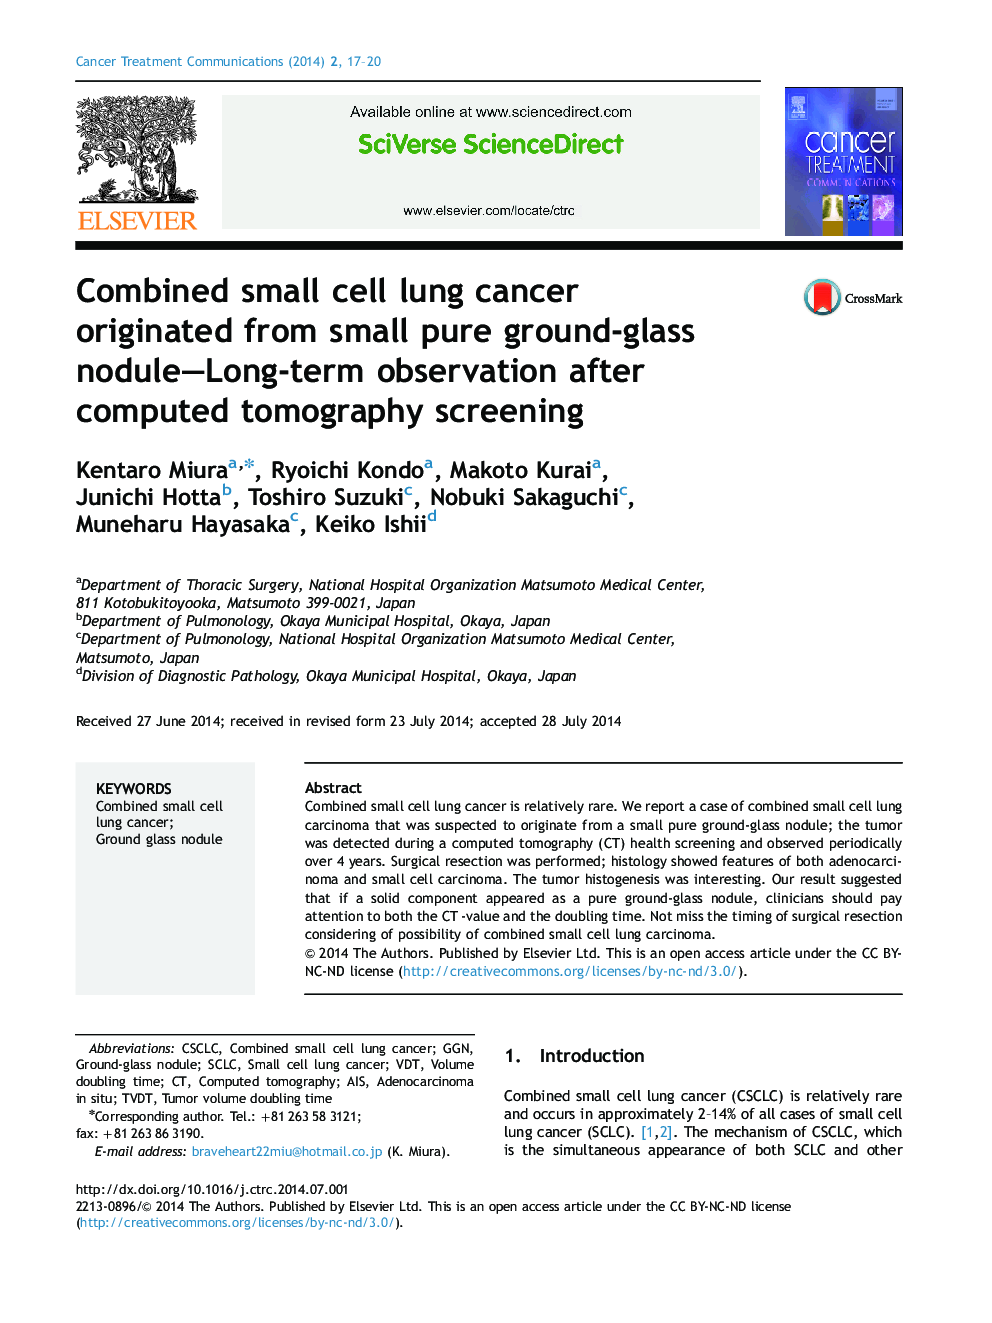 Combined small cell lung cancer originated from small pure ground-glass nodule—Long-term observation after computed tomography screening